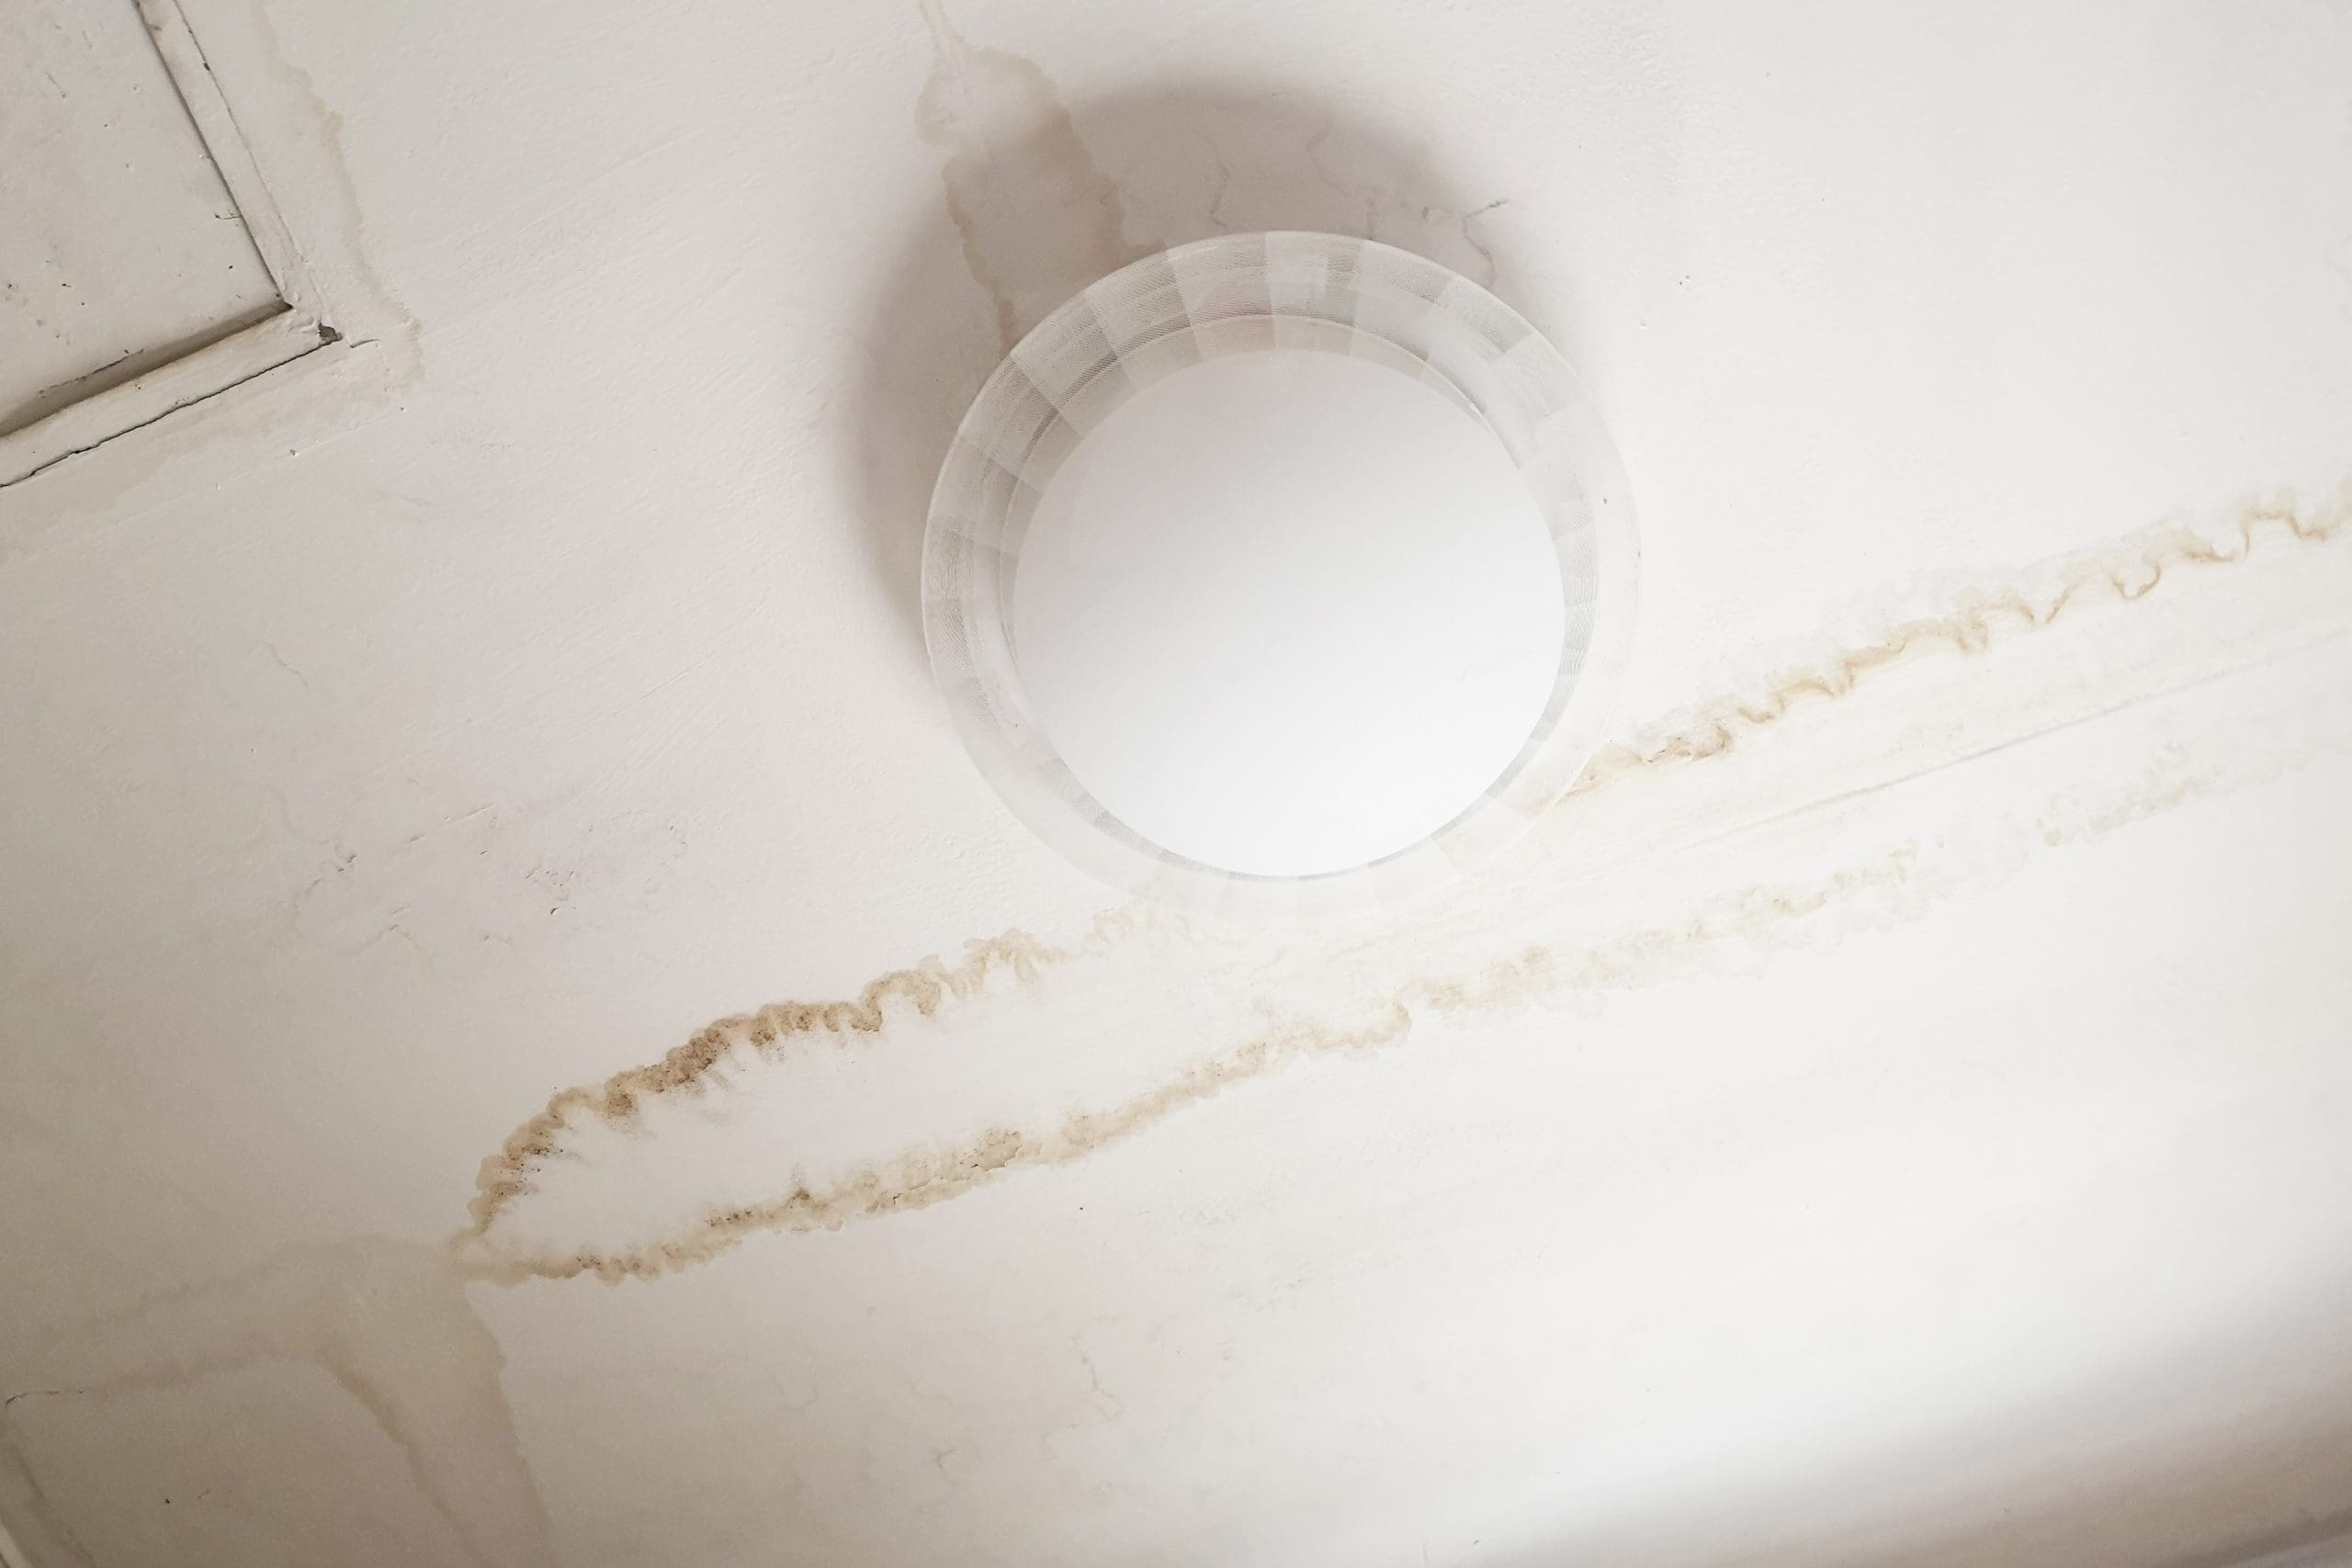 Four Common Causes of Water Damage